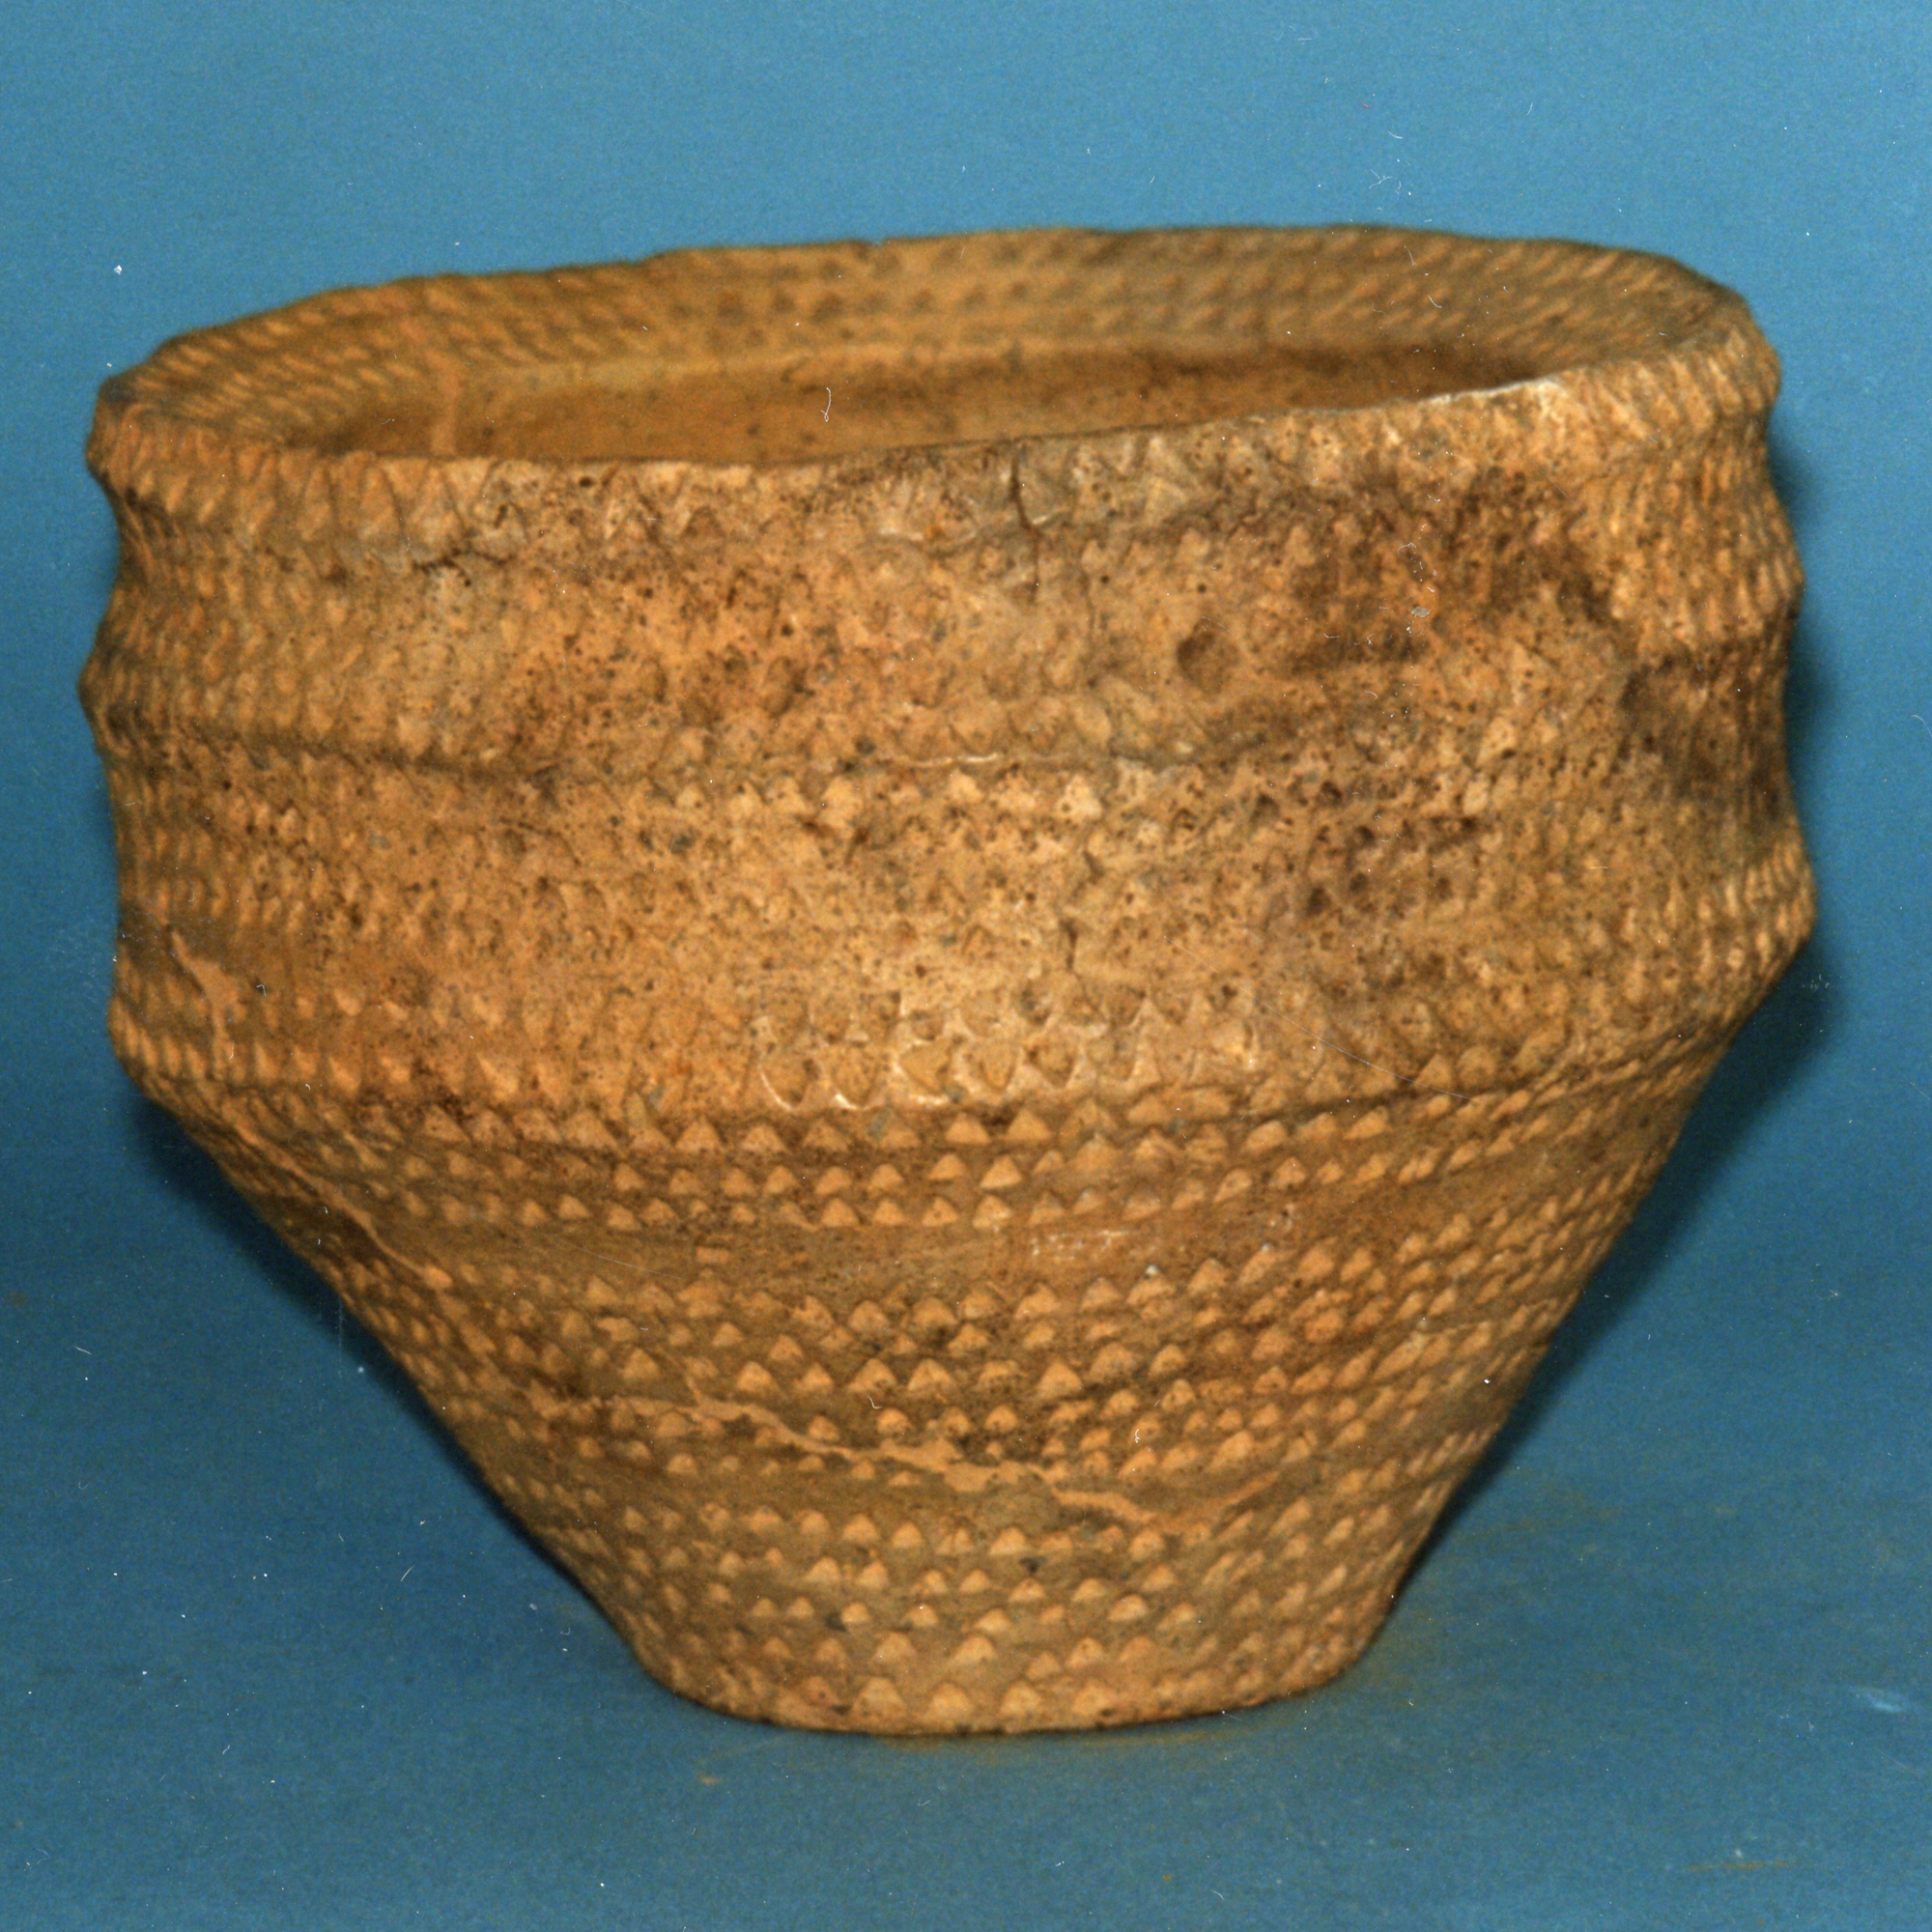 Image of Tripartite vase food vessel decorated with triangular punch marks in horizontal rows, from Denovan, Stirlingshire, 2300 - 1700 BC © National Museums Scotland